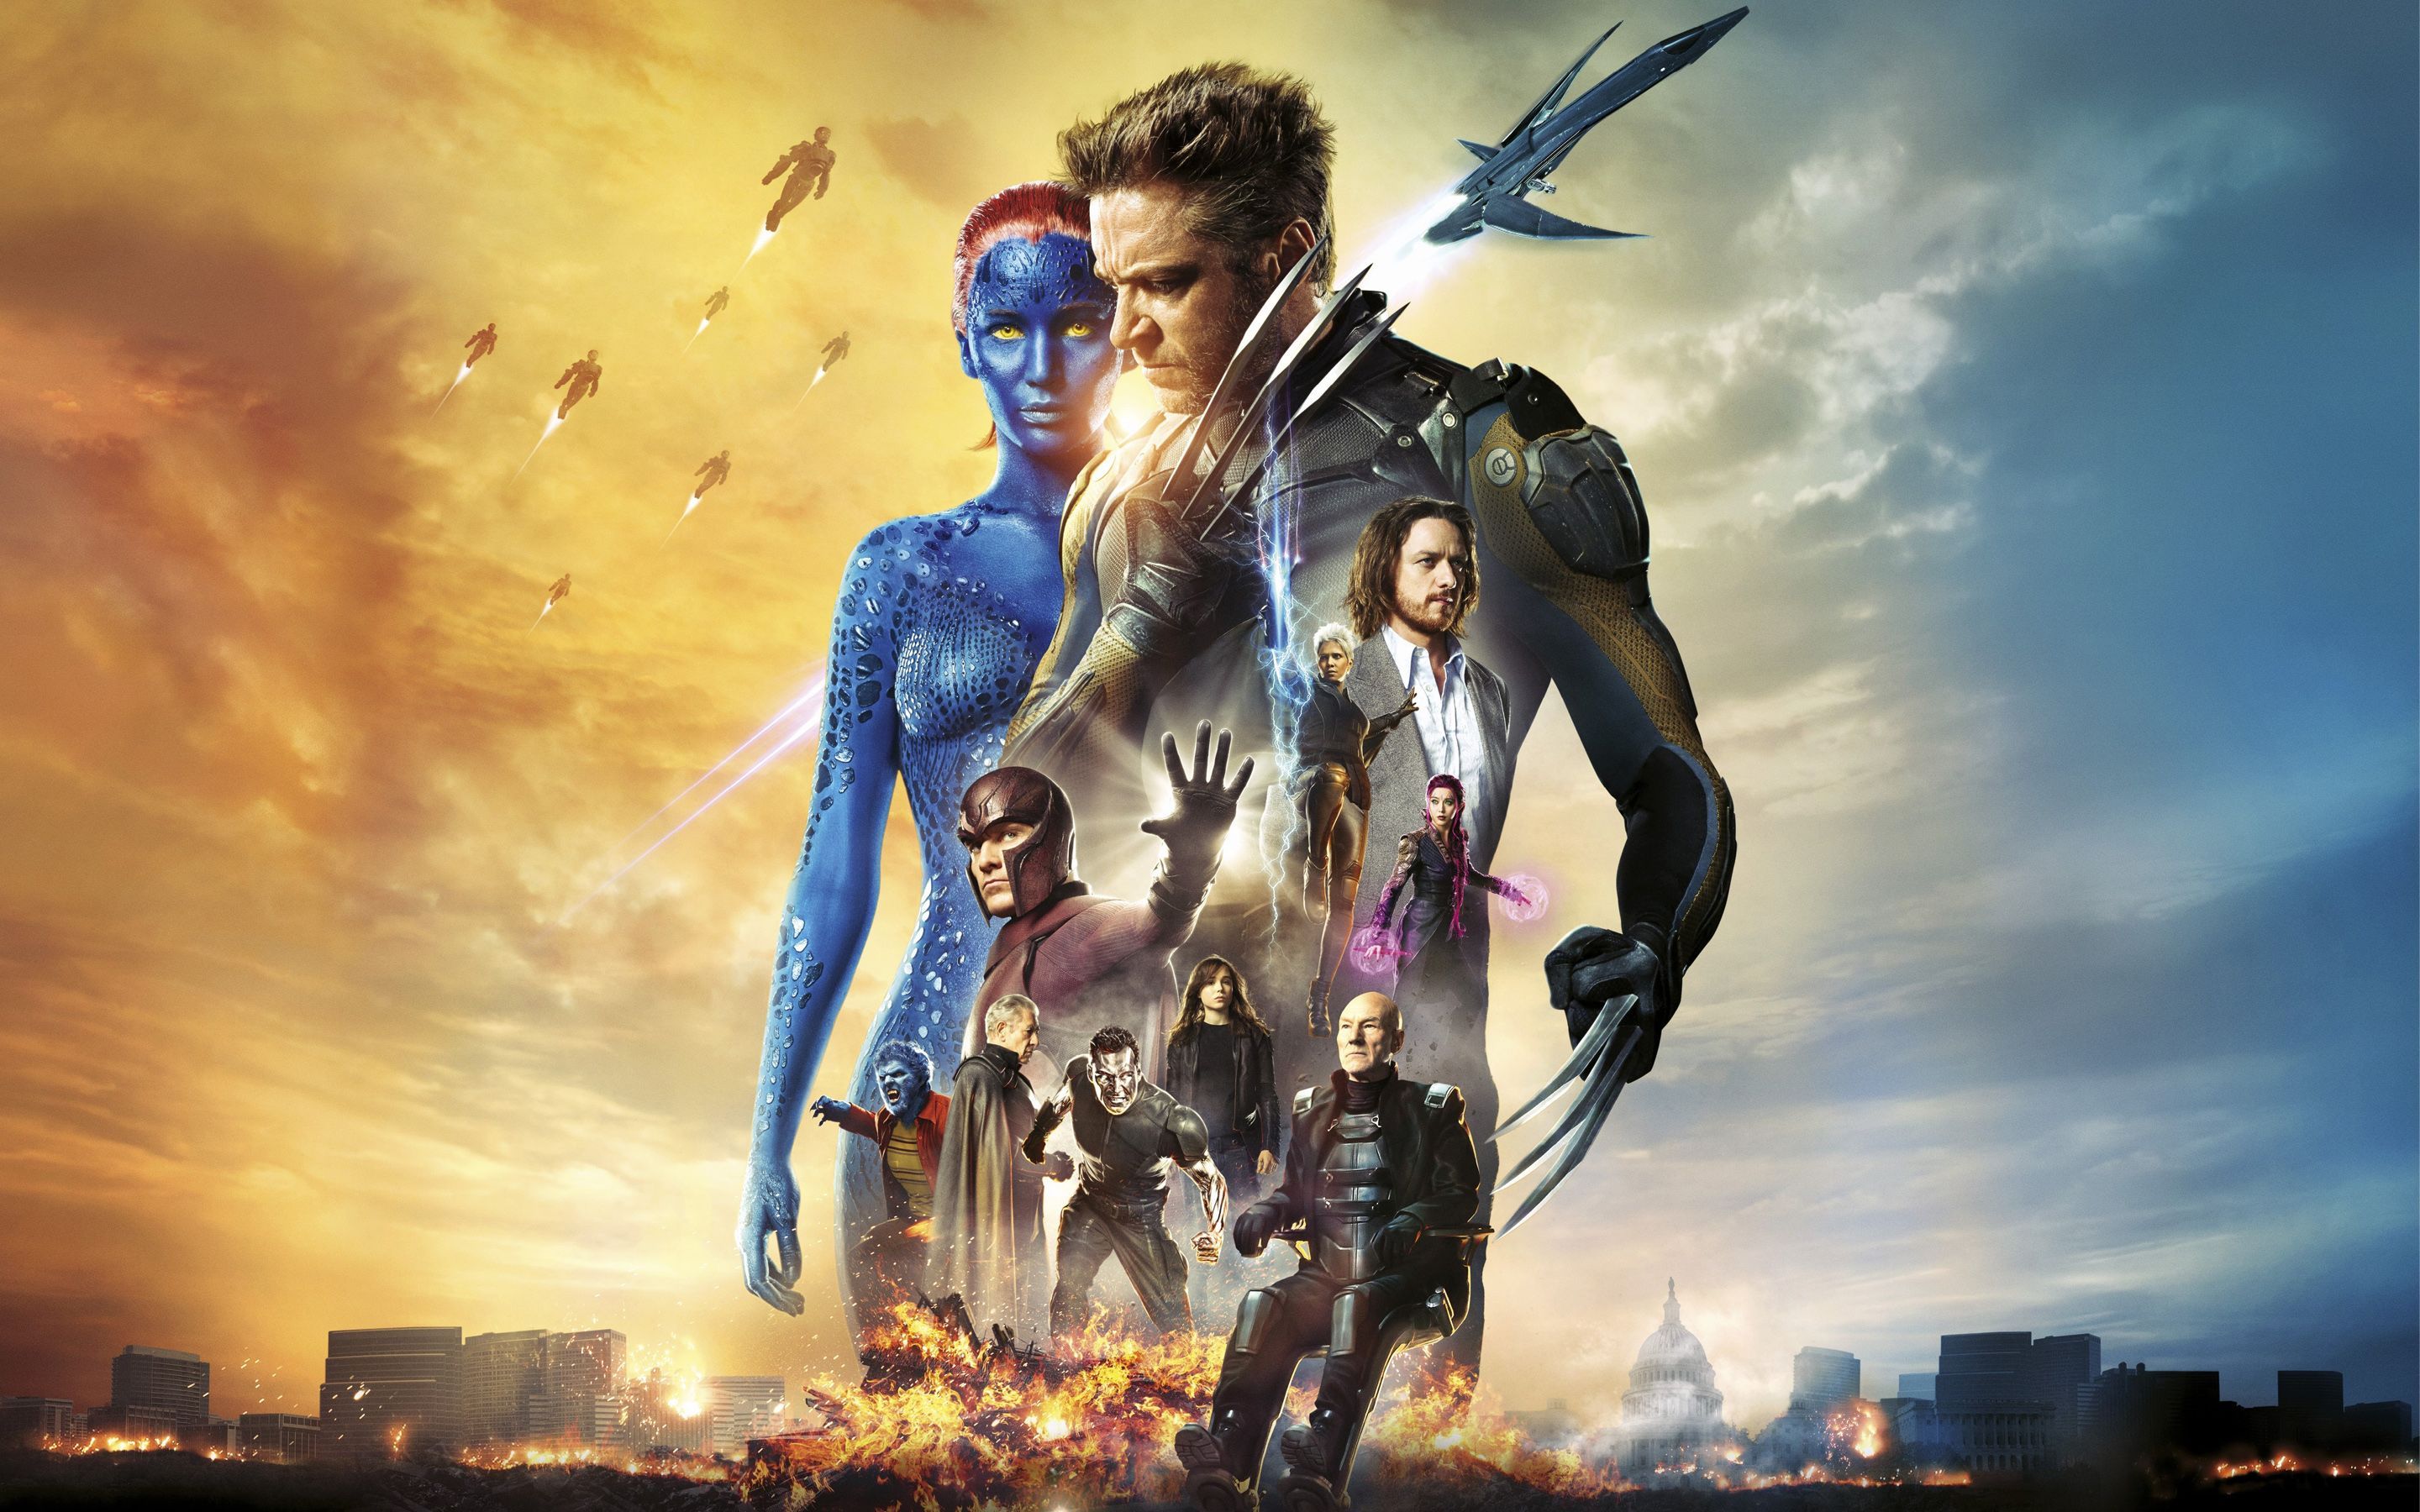 Entertainment. Days of future past, X men, New movies